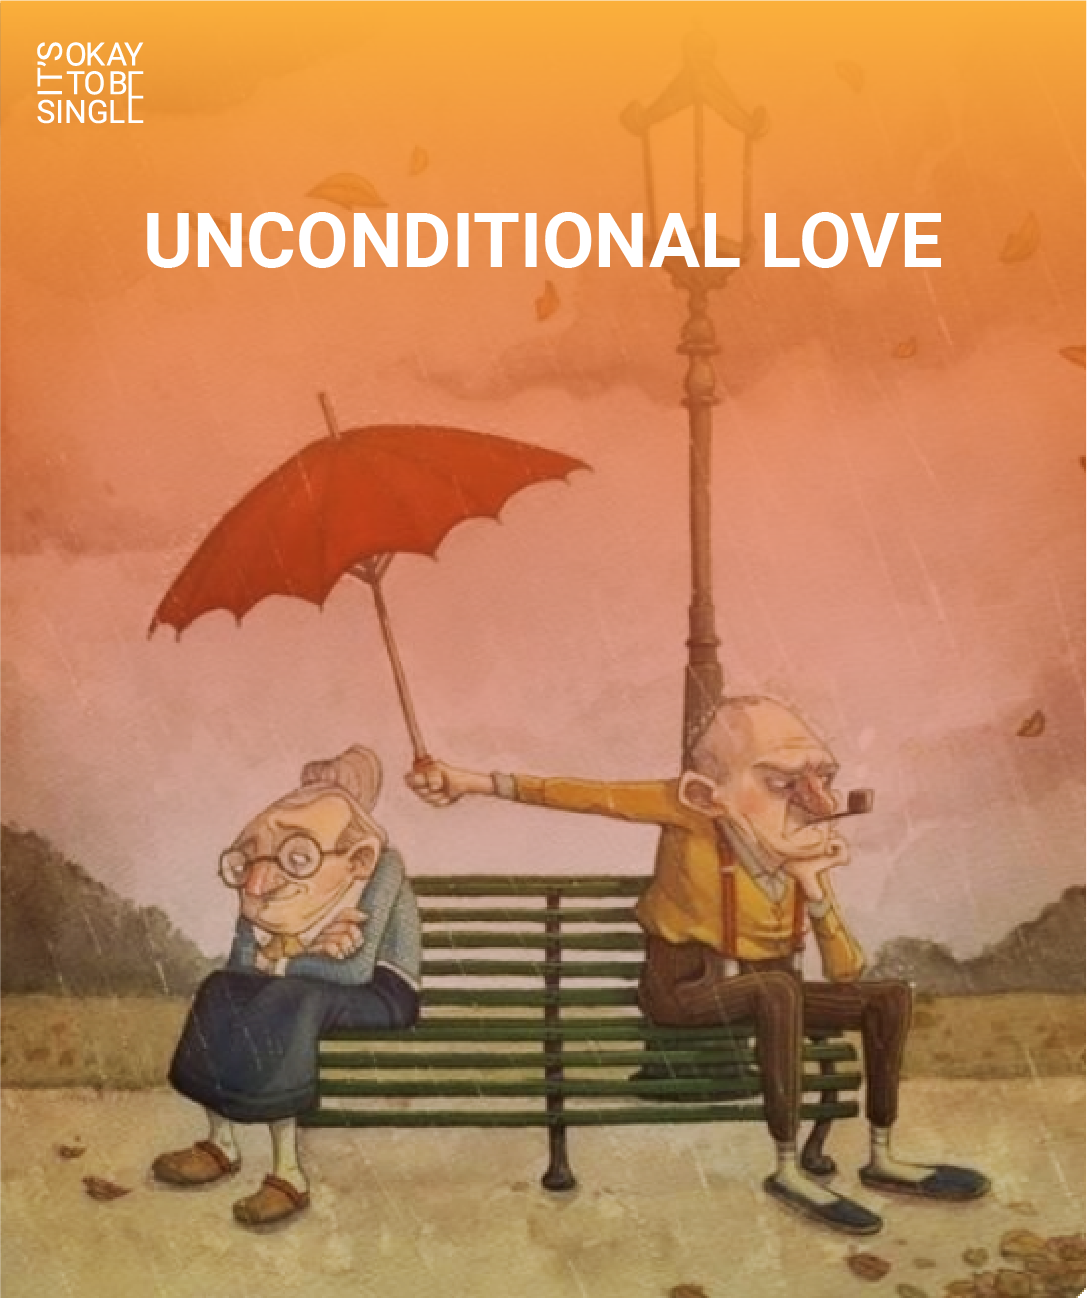 Unconditional Love And True Love: Are they The Same Thing? - Divorced Girl  Smiling